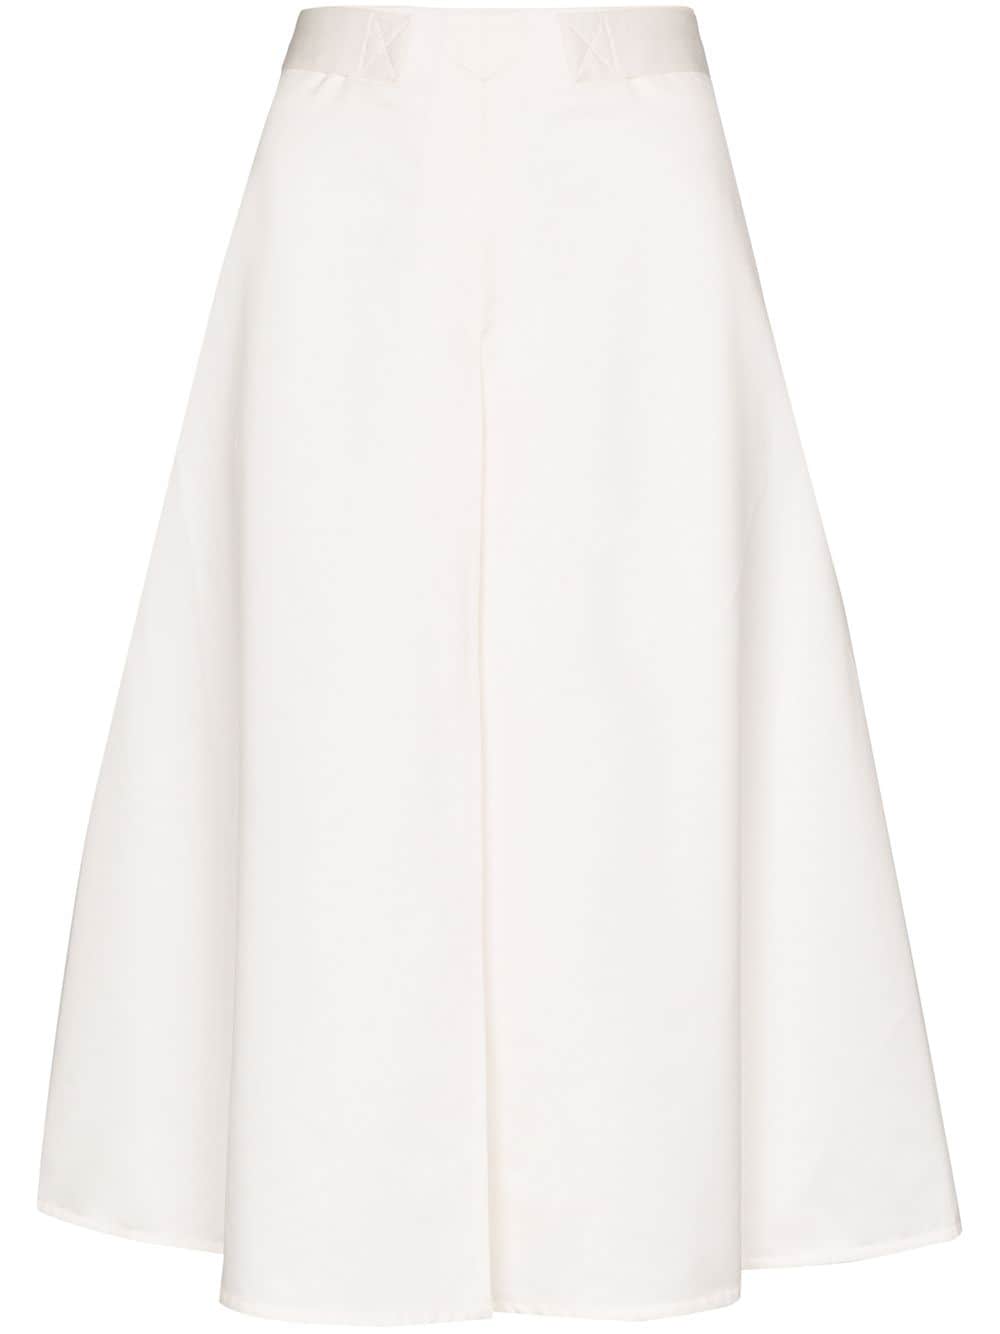 MARNI BELTED COTTON A-LINE SKIRT